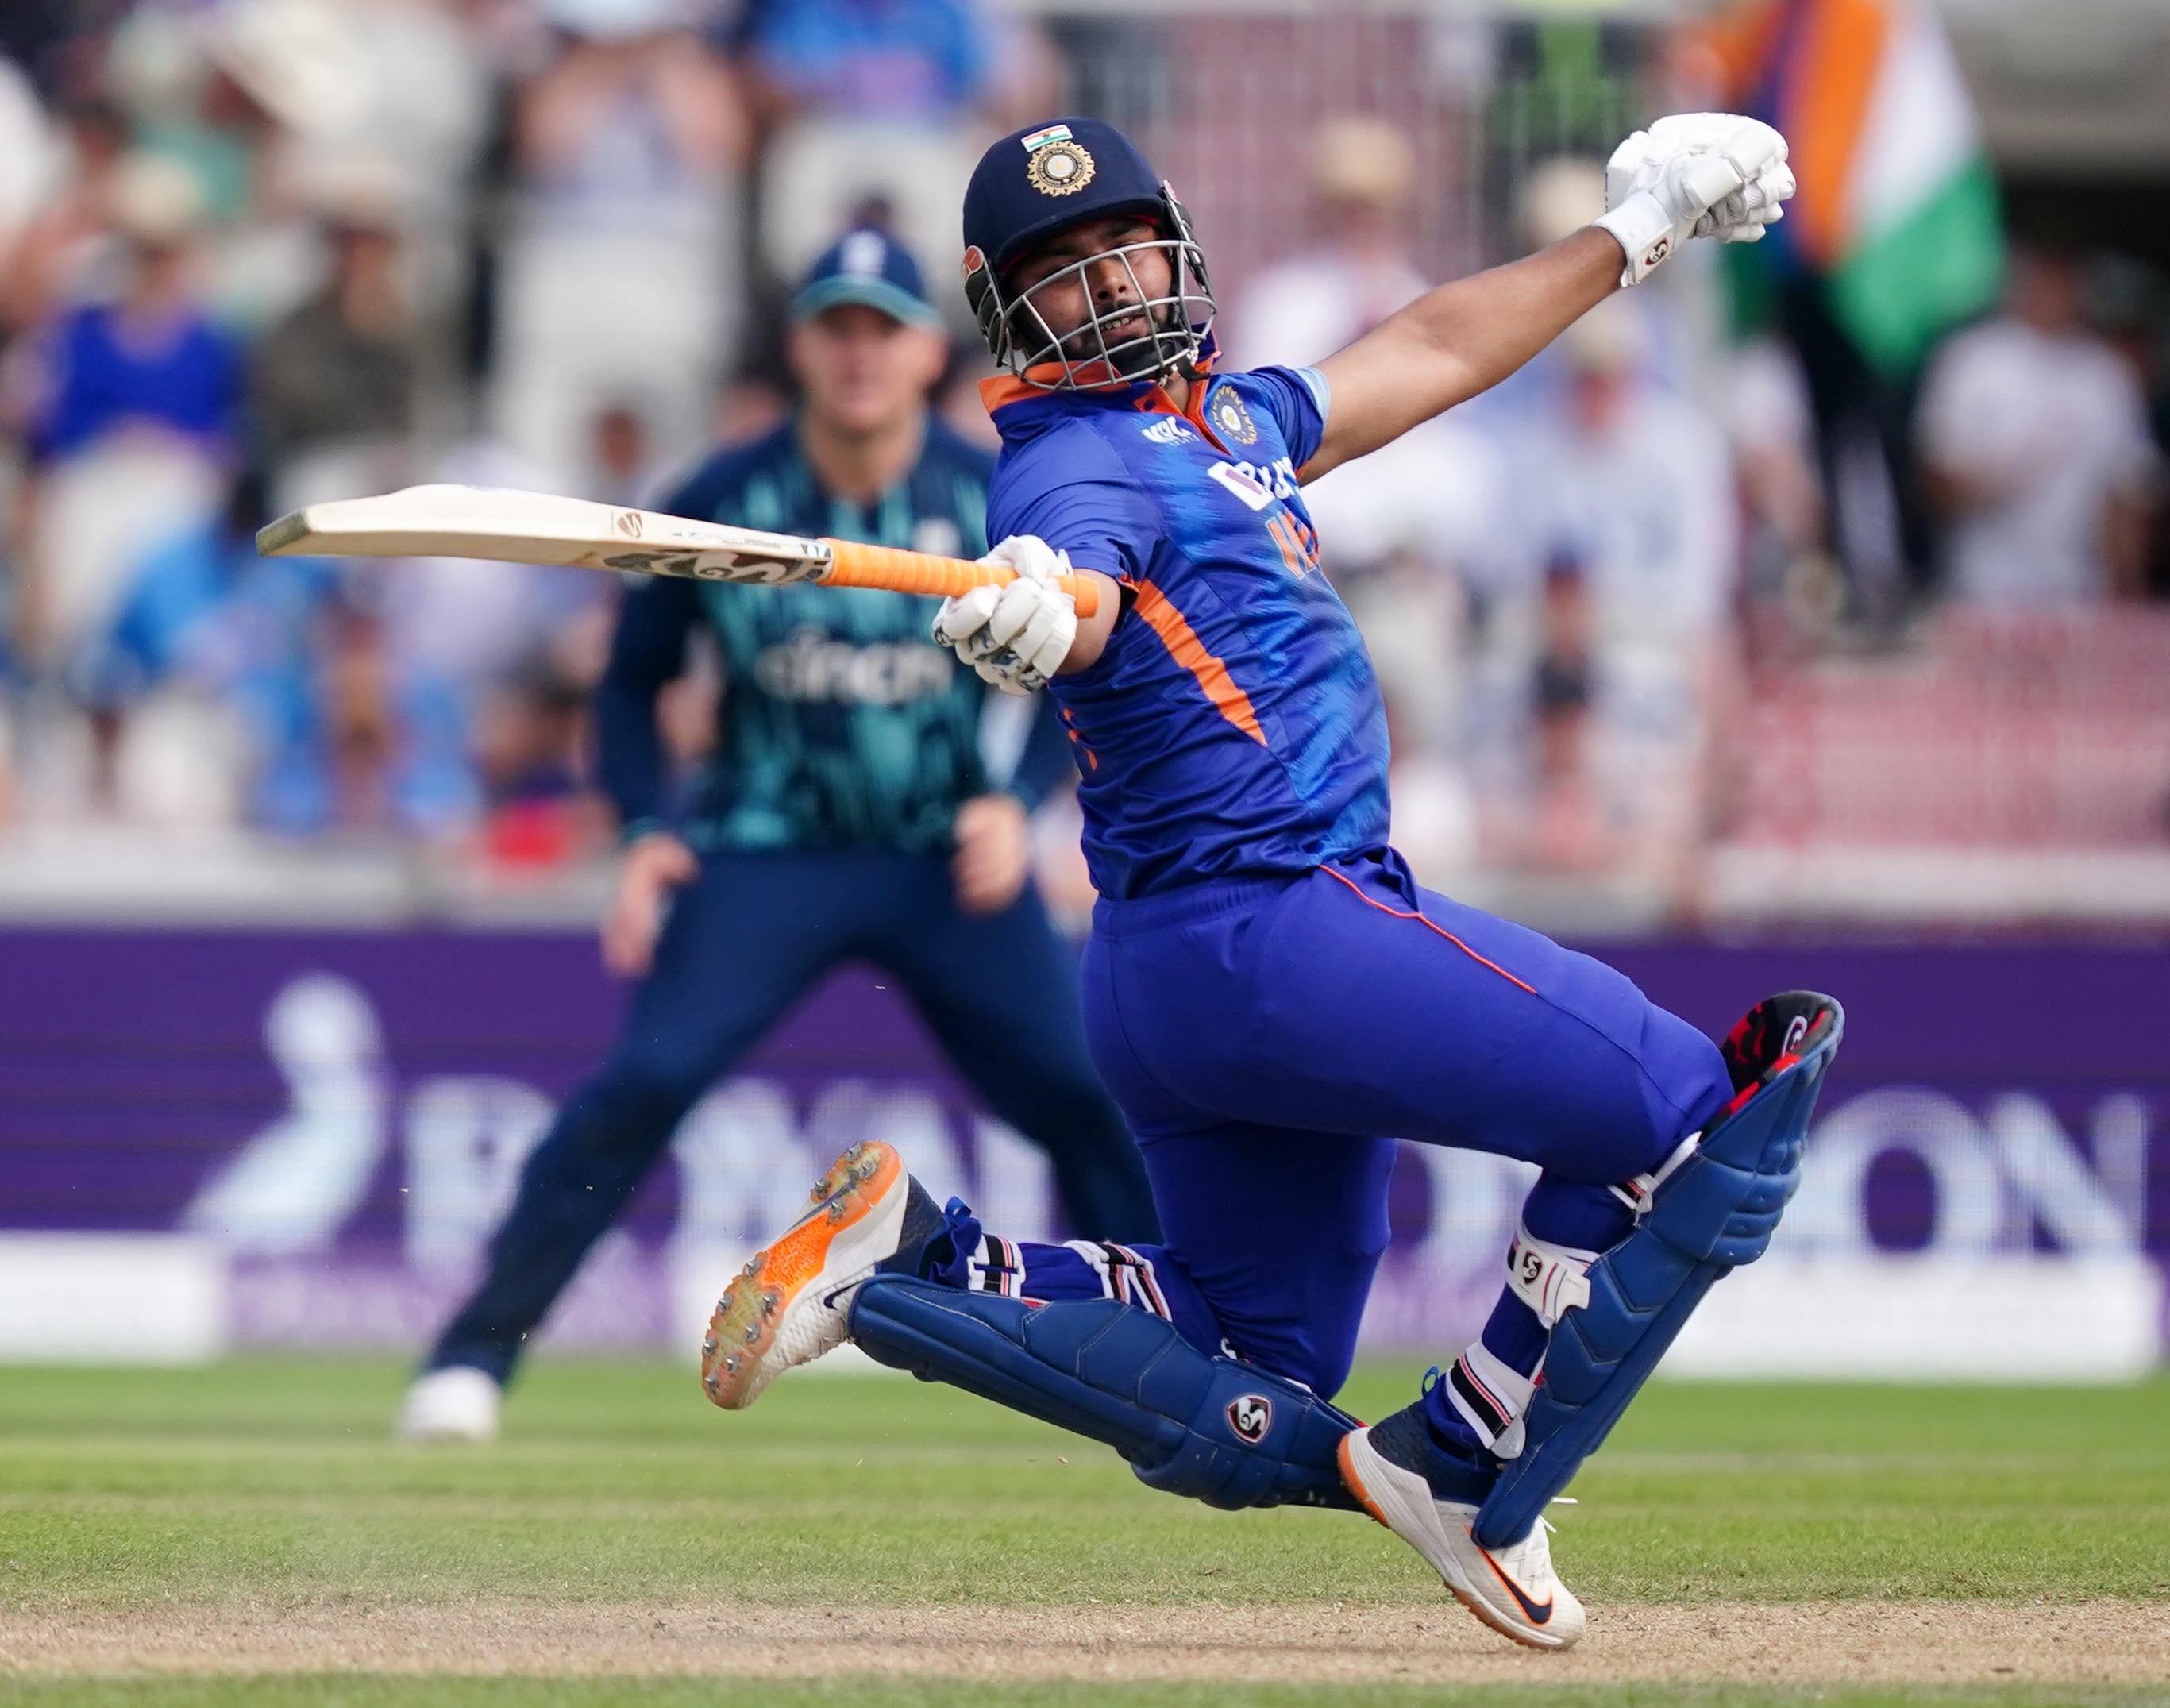 Rishabh Pant’s unbeaten 125 at Old Trafford, which included five successive fours, set India up for a five-wicket ODI win and 2-1 series triumph over England (Mike Egerton/PA)